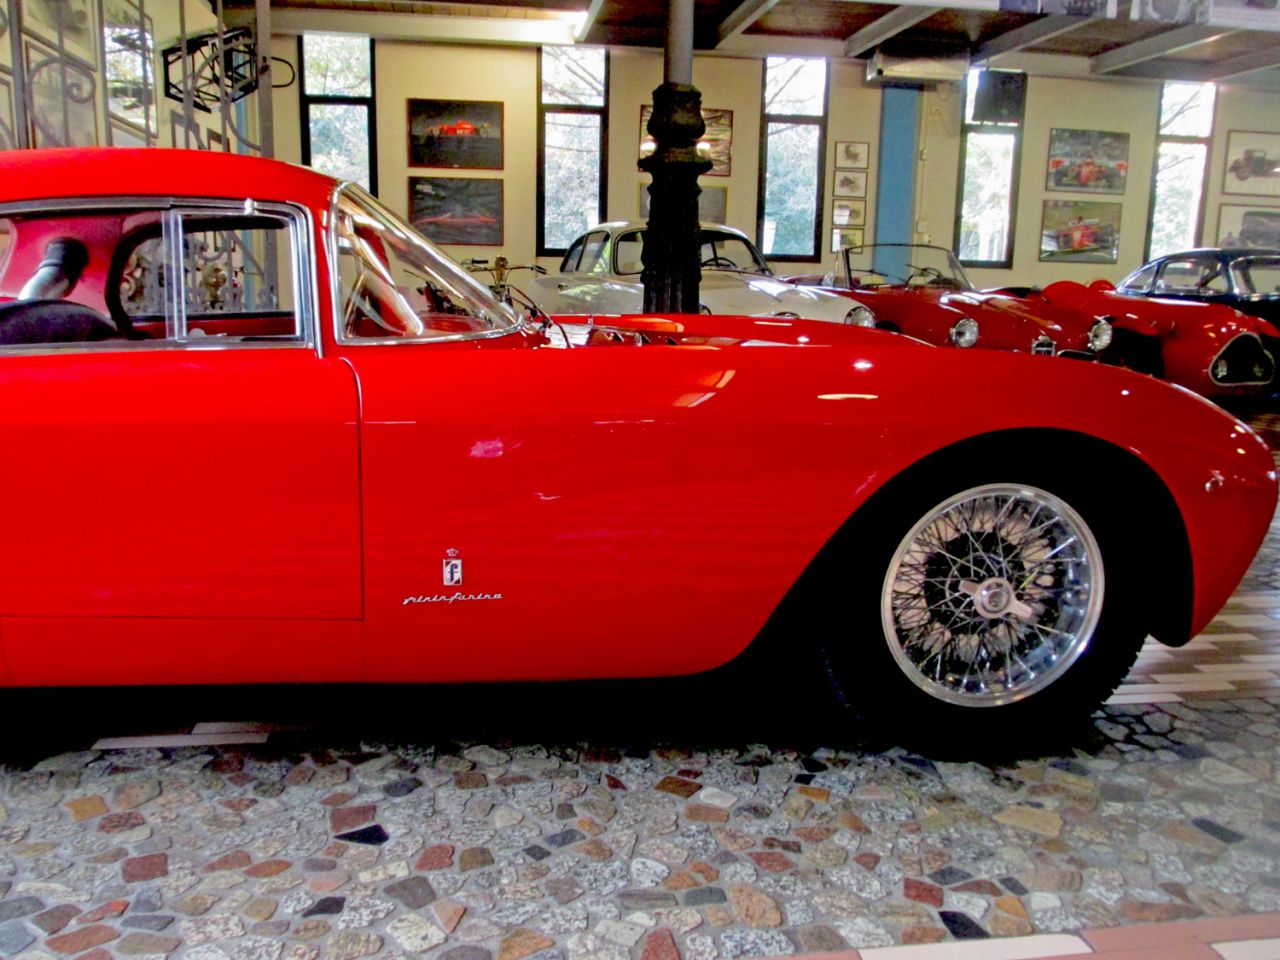 This 1953 Maserati A6 GCS Berlinetta is part of the Panini Collection in Modena. The Paninis stepped in to prevent many classic Maseratis selling at auction in London.